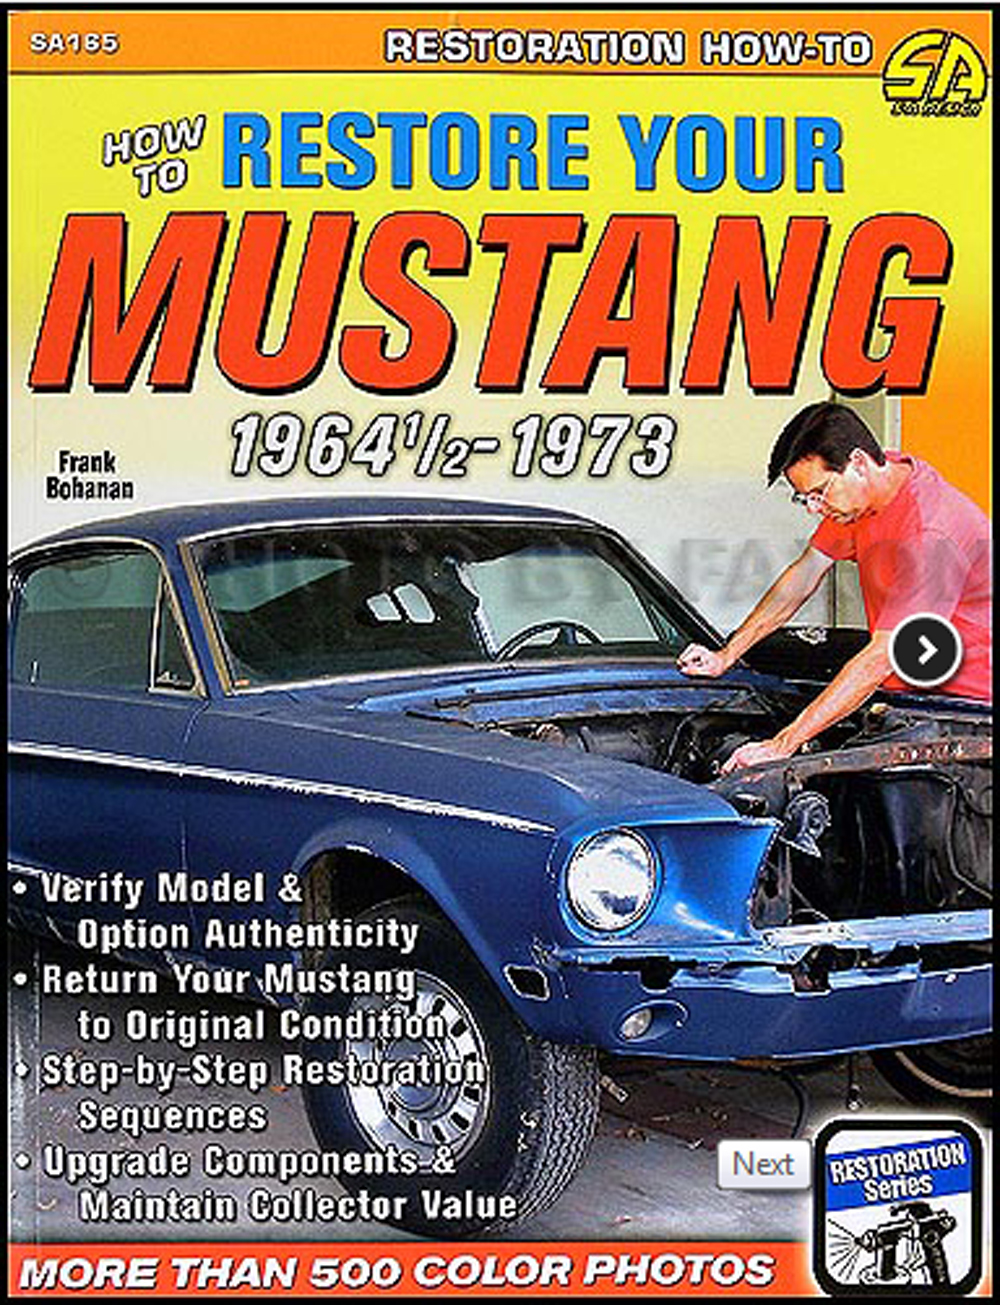 How to Restore your Mustang 1964-1973